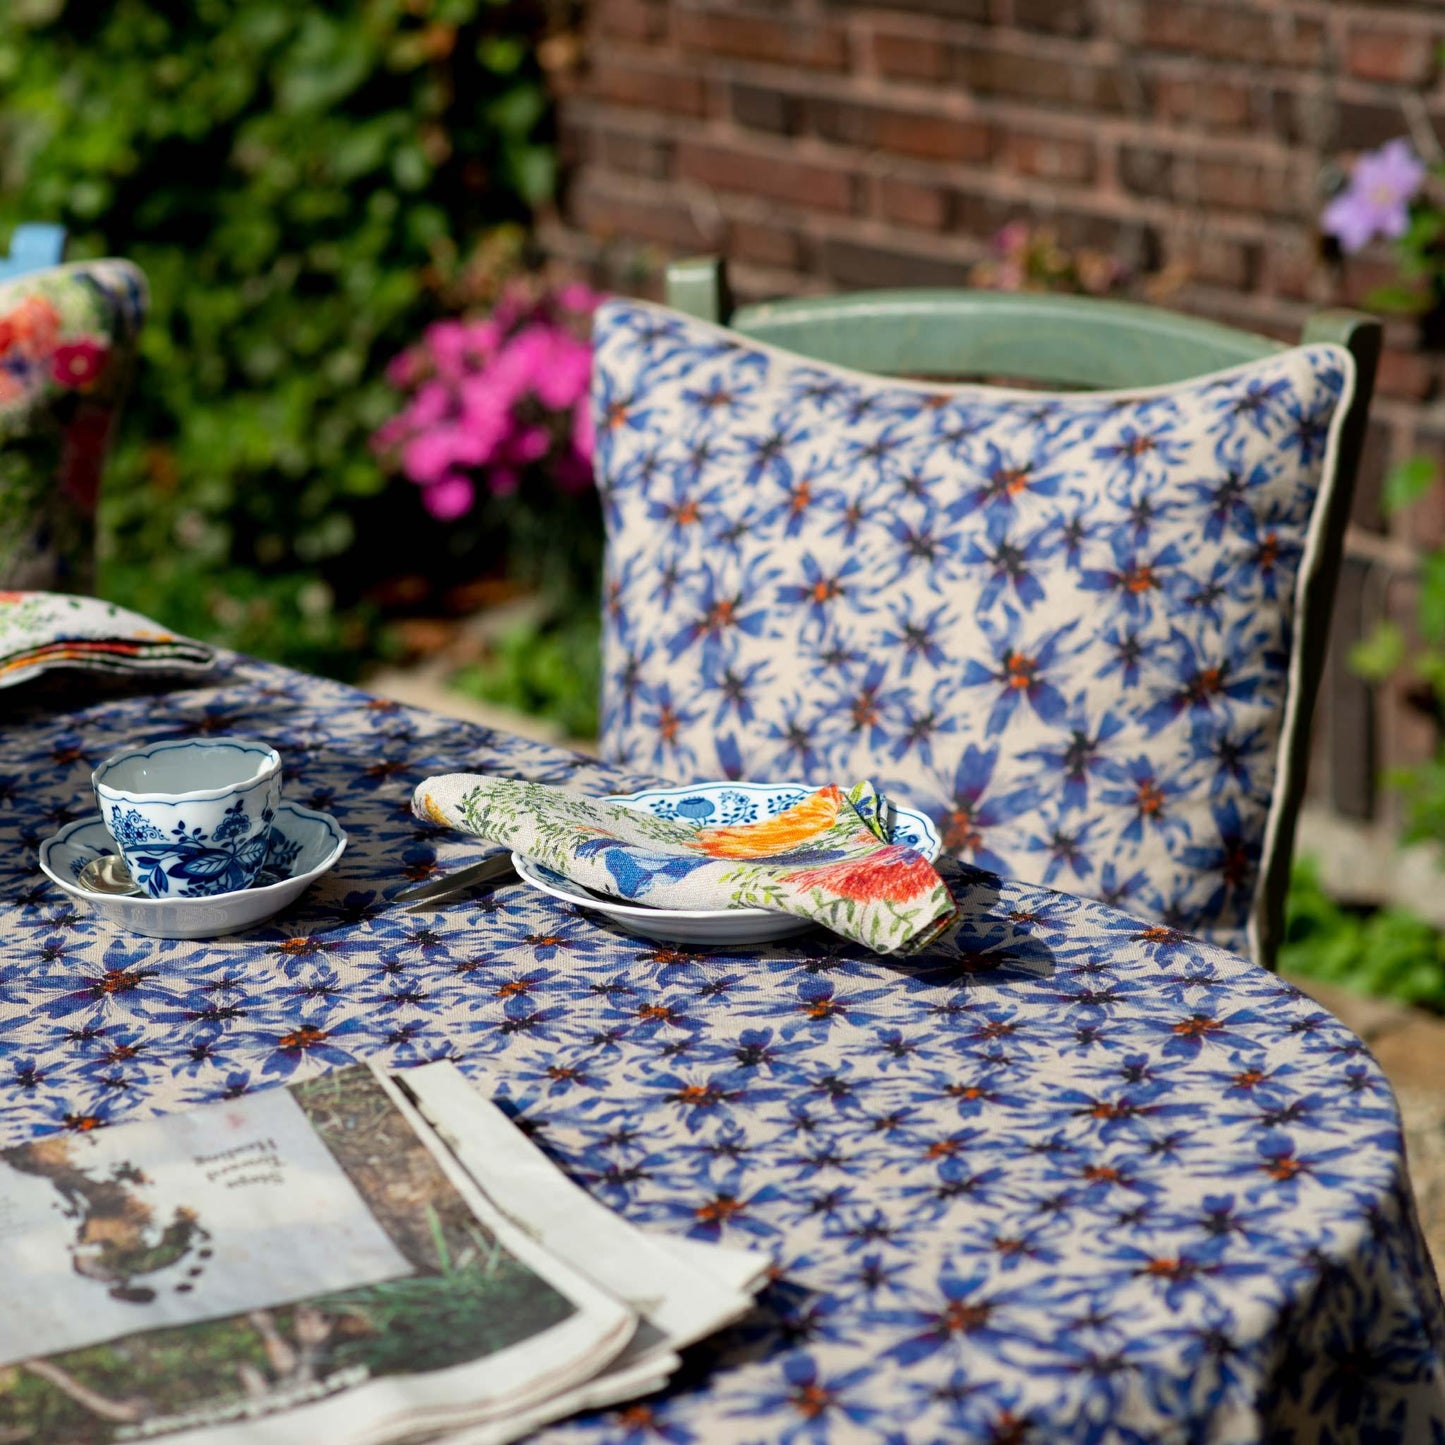 Organic linen pillow cover printed with blue florals and an organic linen tablecloth in the same print.